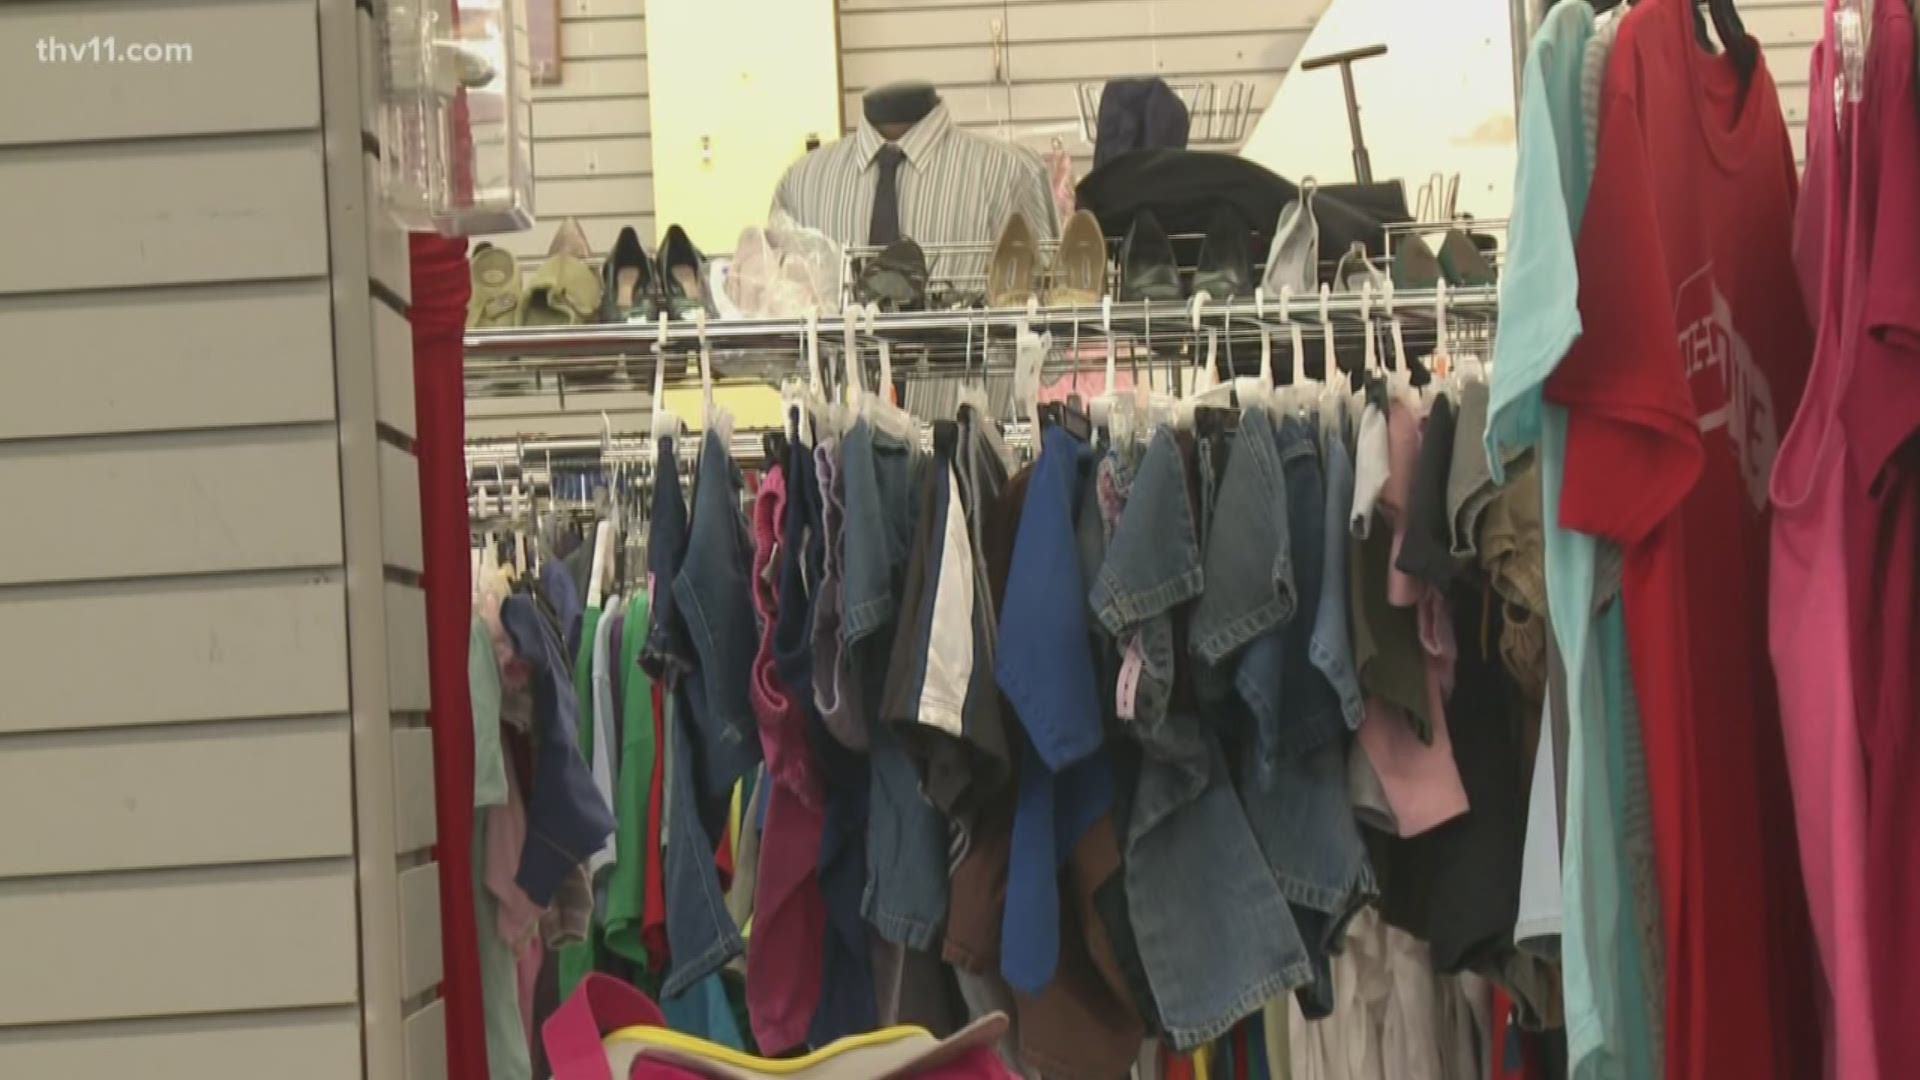 Shopping for new back-to-school clothes is something many families simply can't do, but the Salvation Army in Conway doesn't want any child to feel uncomfortable on their first day.